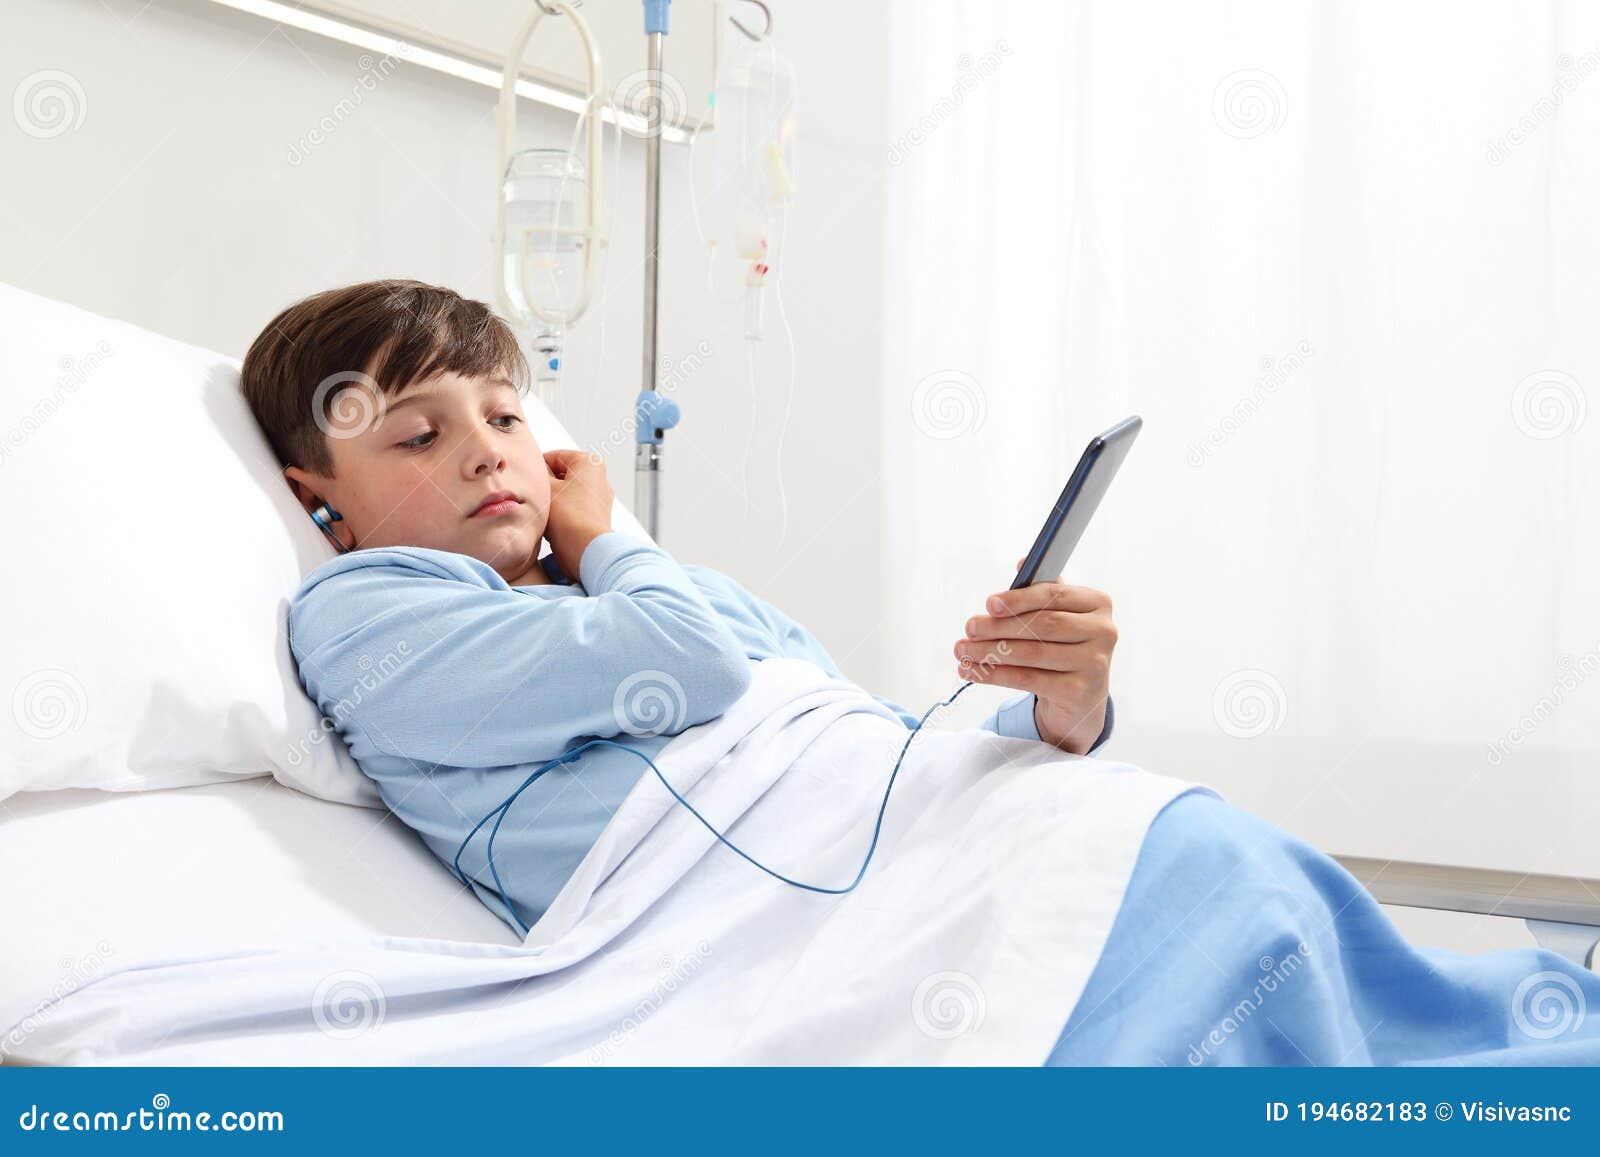 child in hospital bed using smartphone surfs the internet wearing earphones